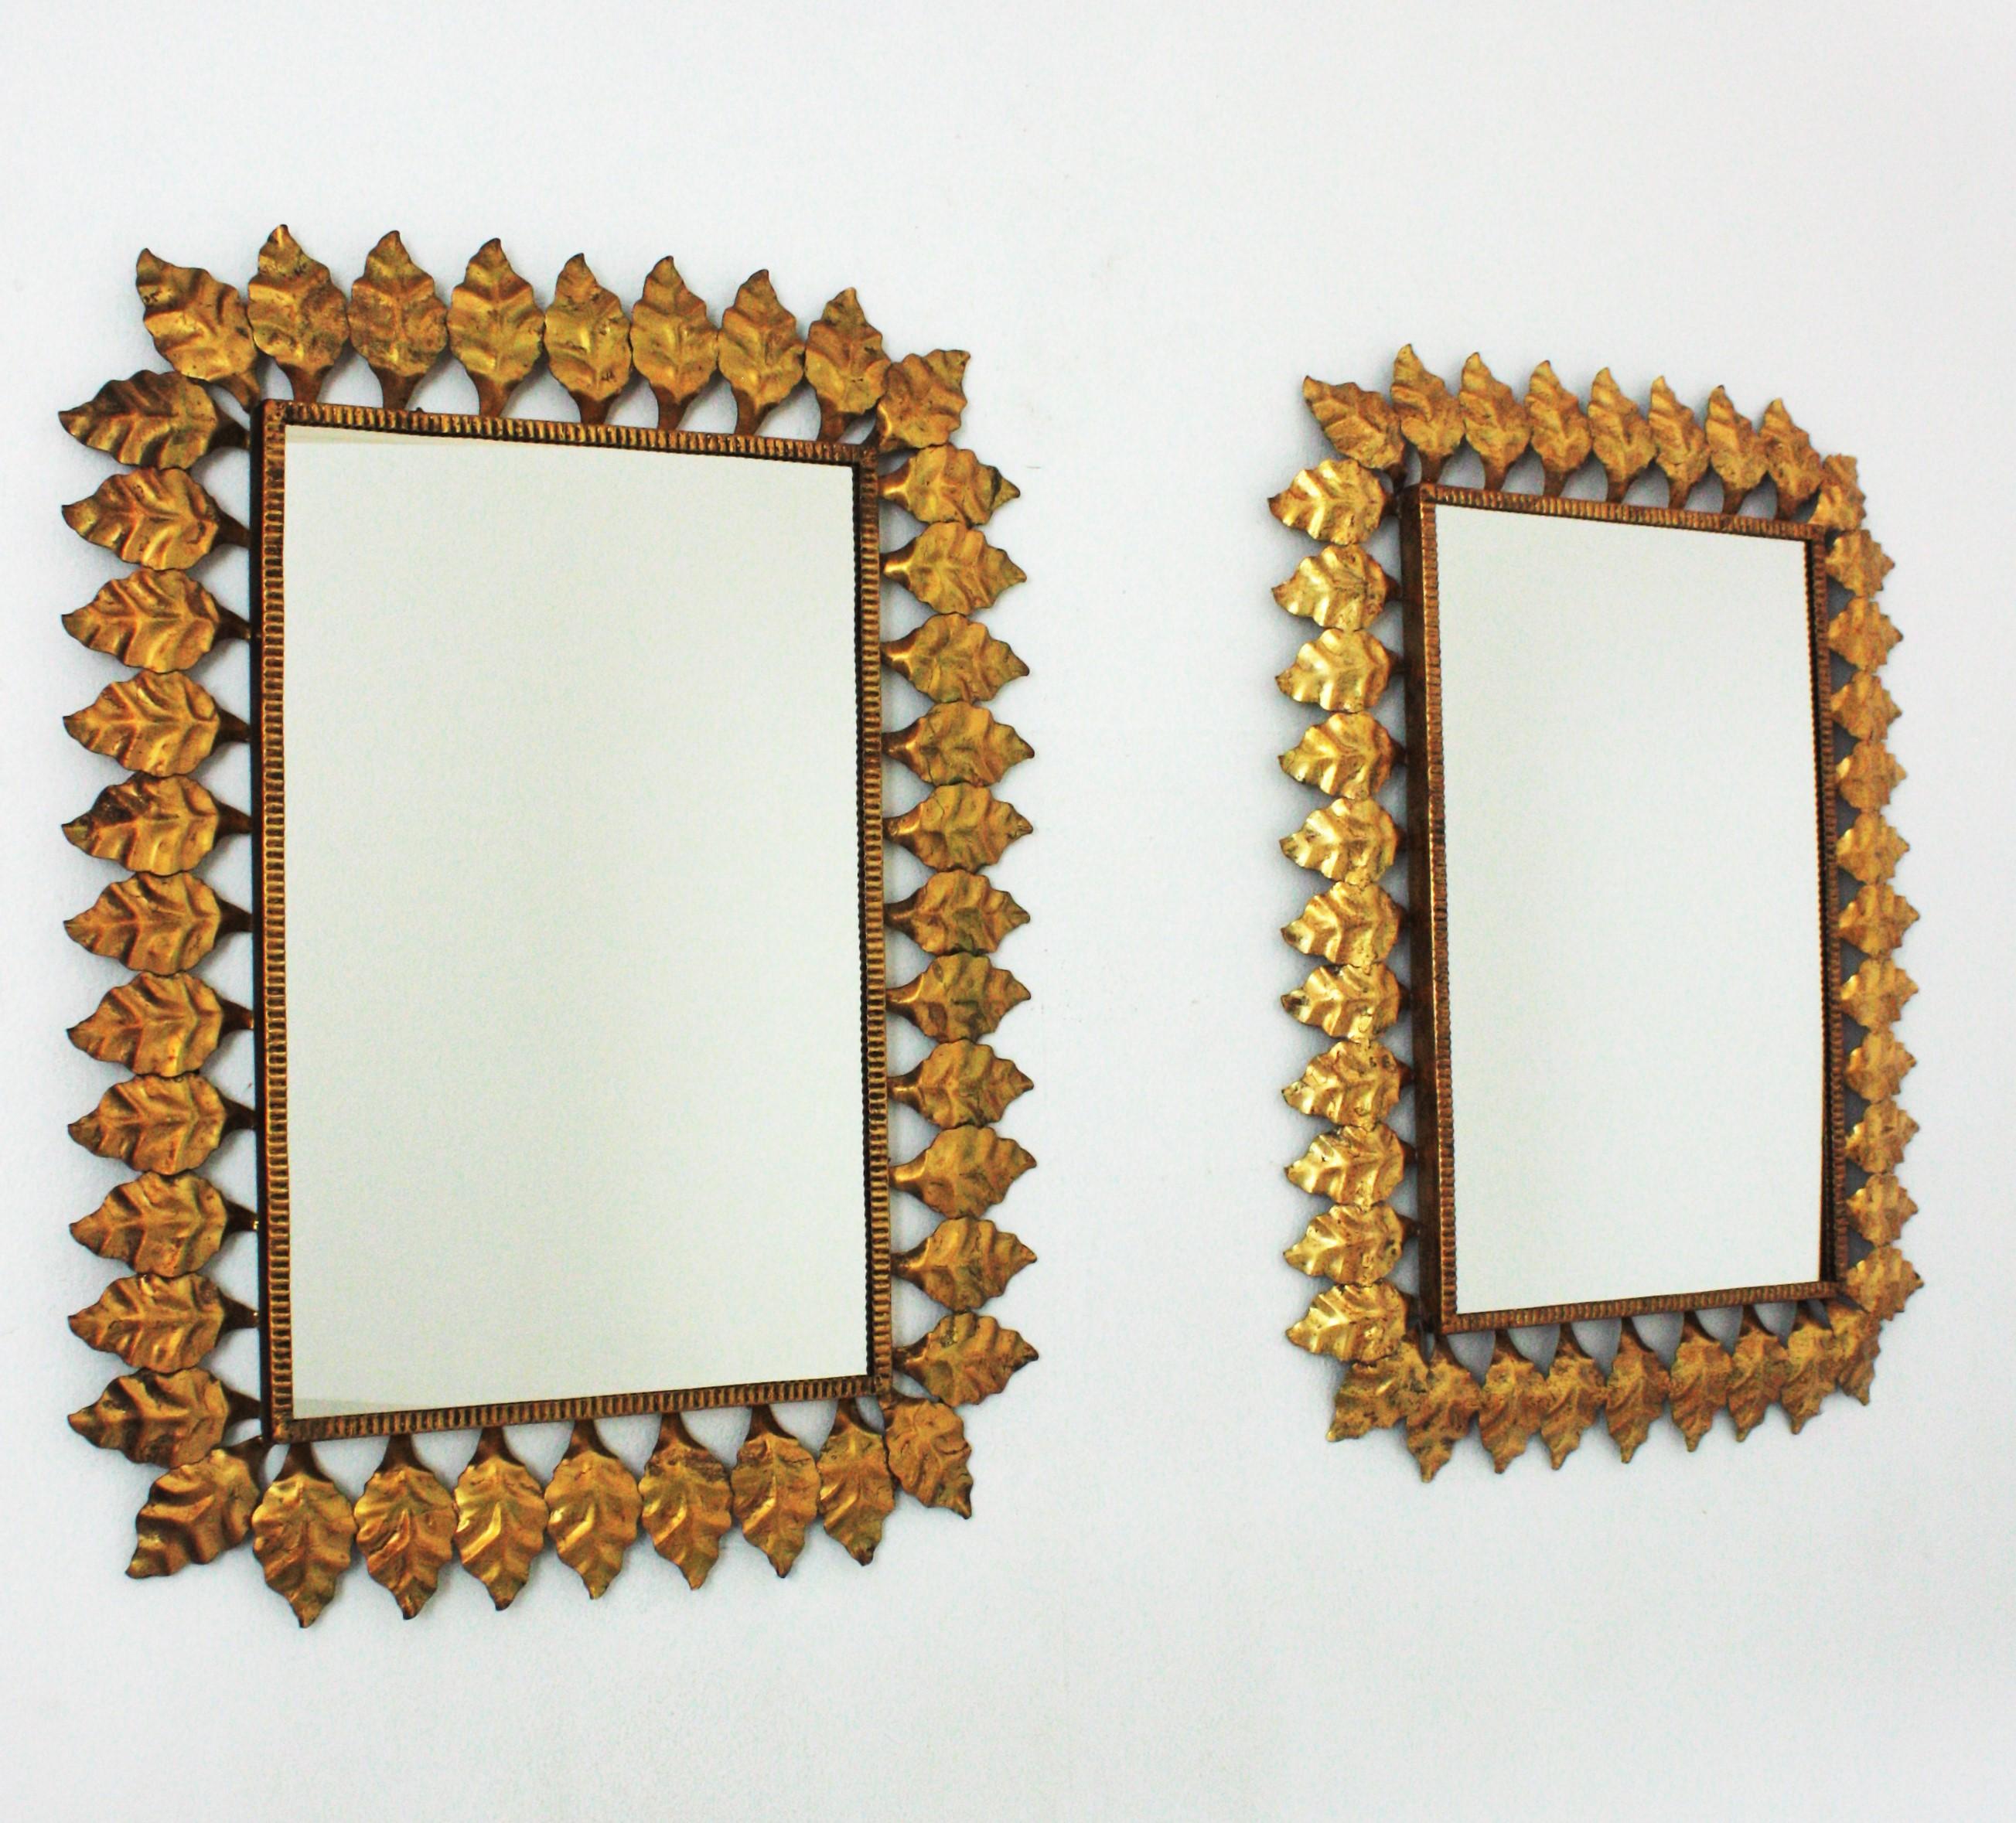 Pair of hand-hammered iron sunburst rectangular wall mirrors with gold leaf finish, Spain, 1950s.
Highly decorative rectangular leaf framed sunburst mirrors with gold leaf gilding and large glass surfaces.
They have a nice aged patina showing